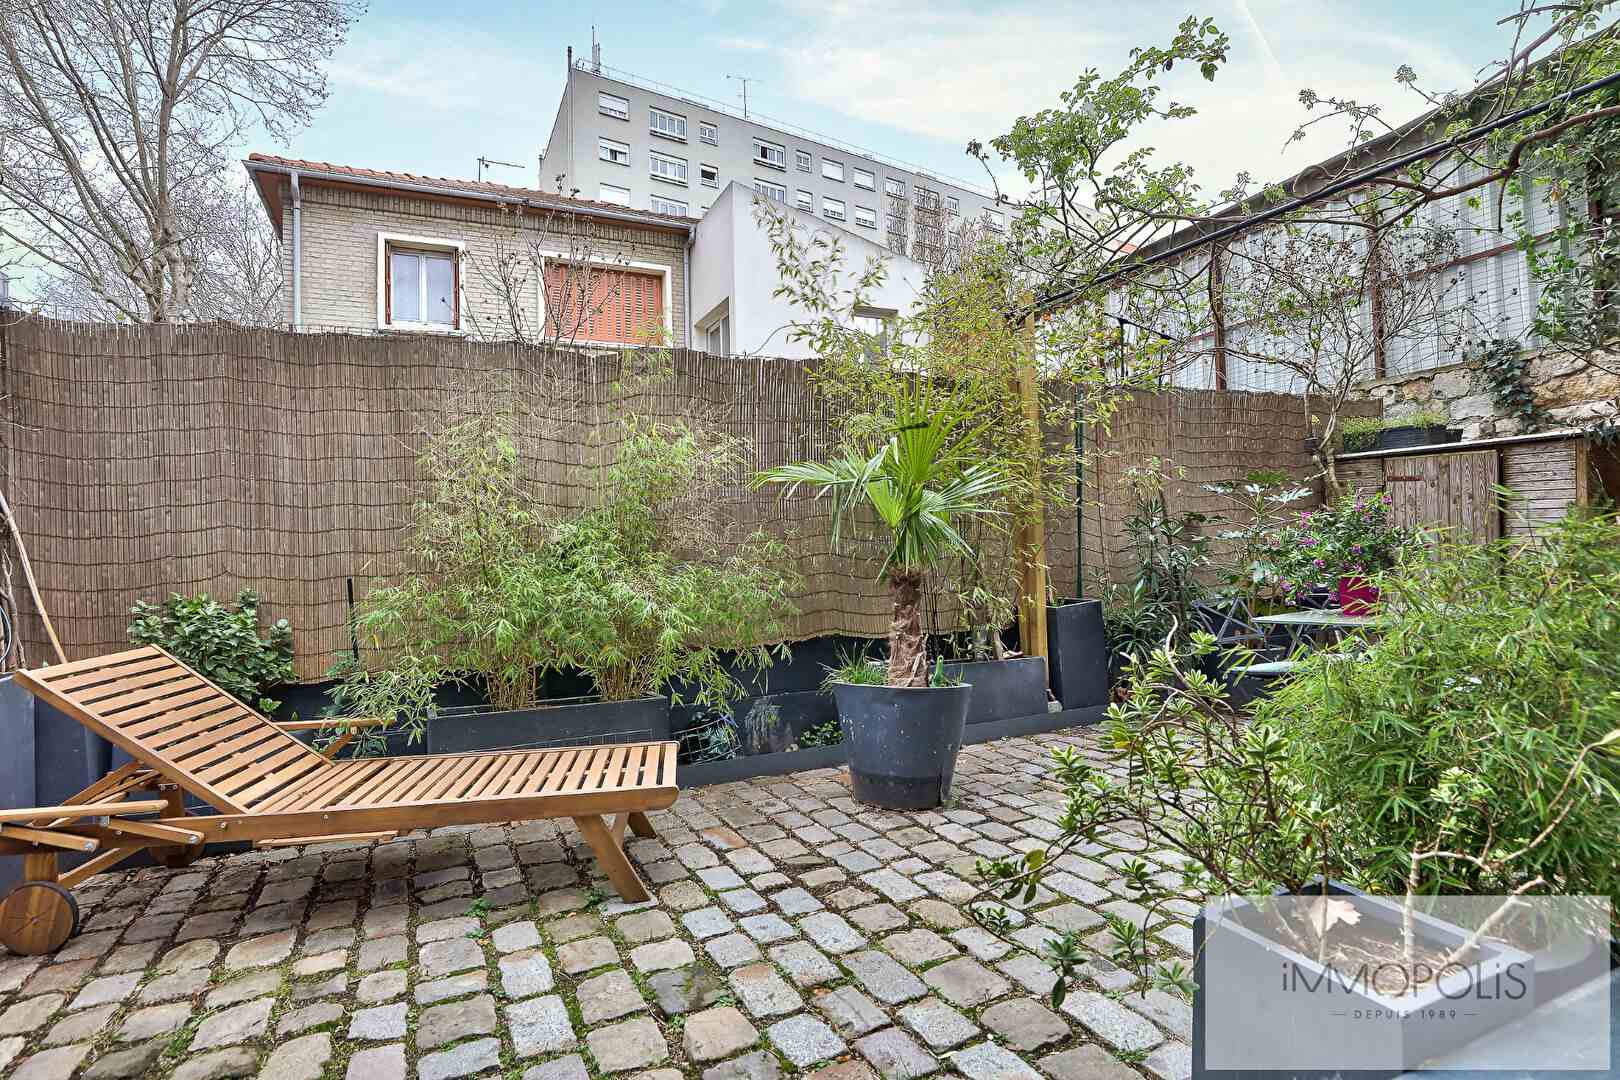 Off-Market: House with exceptional services in Saint Ouen sur Seine, 6 rooms, large reception, 1 interior courtyard and 1 terrace 3